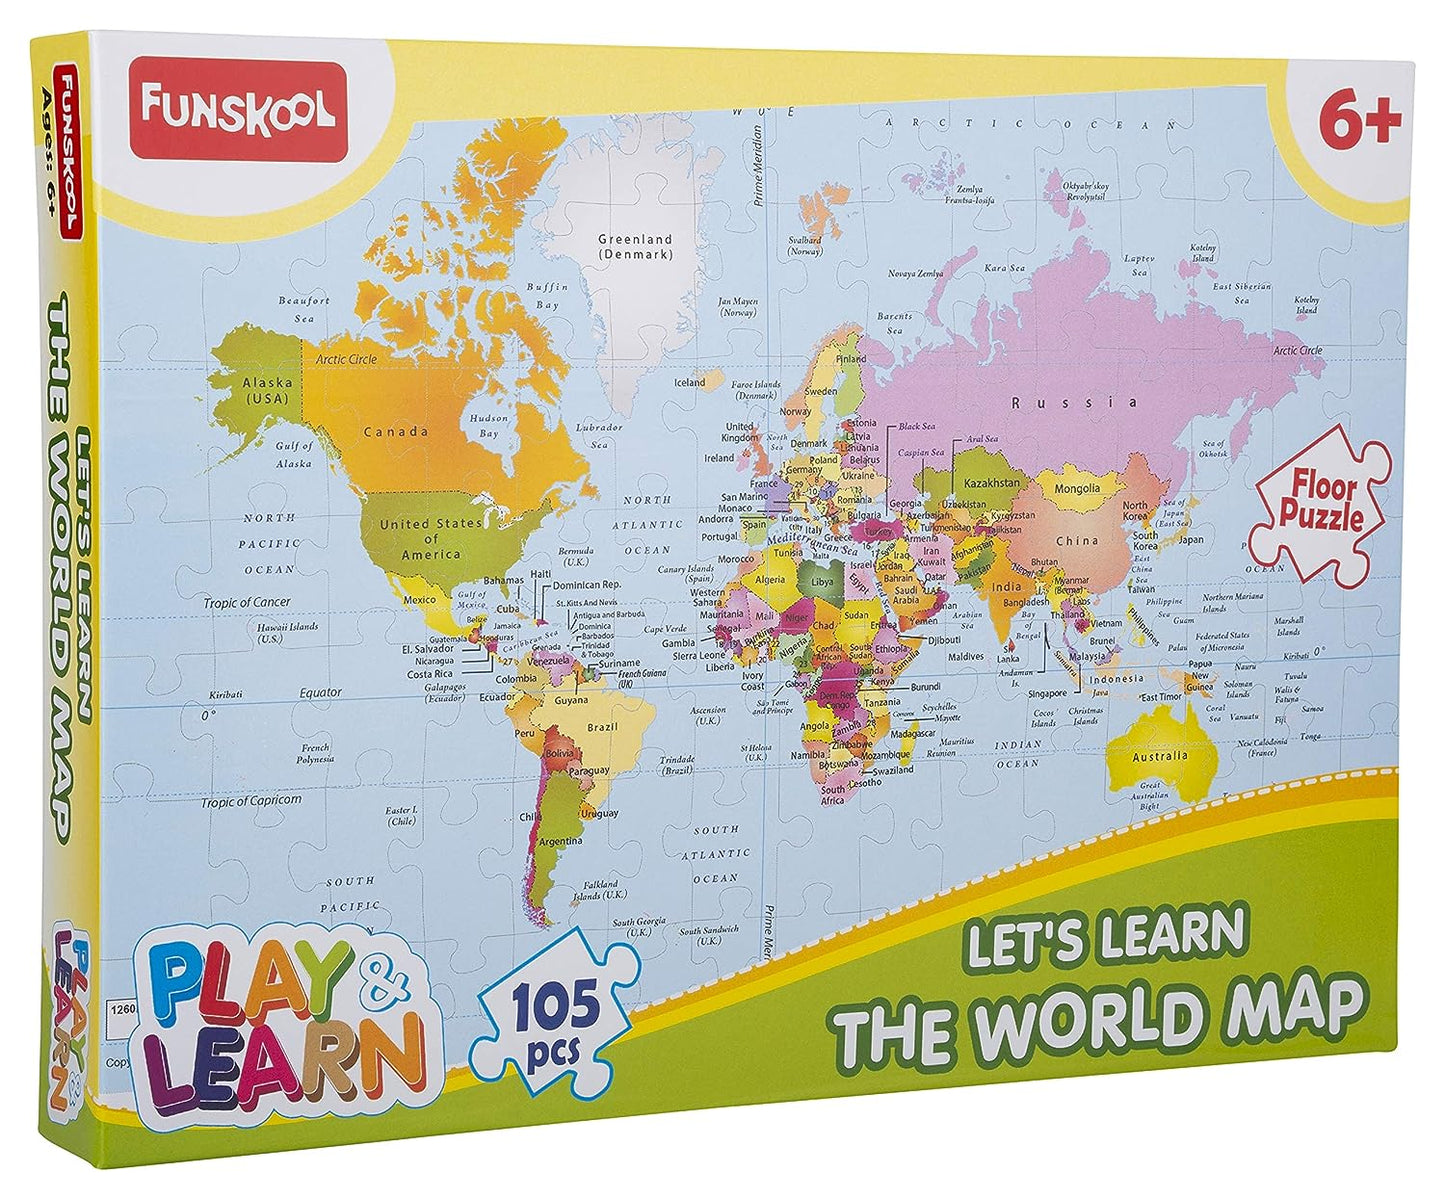 Funskool - Play & Learn-World Map Puzzle, Educational, 105 Pieces, For 6+ Years, Multi-Color